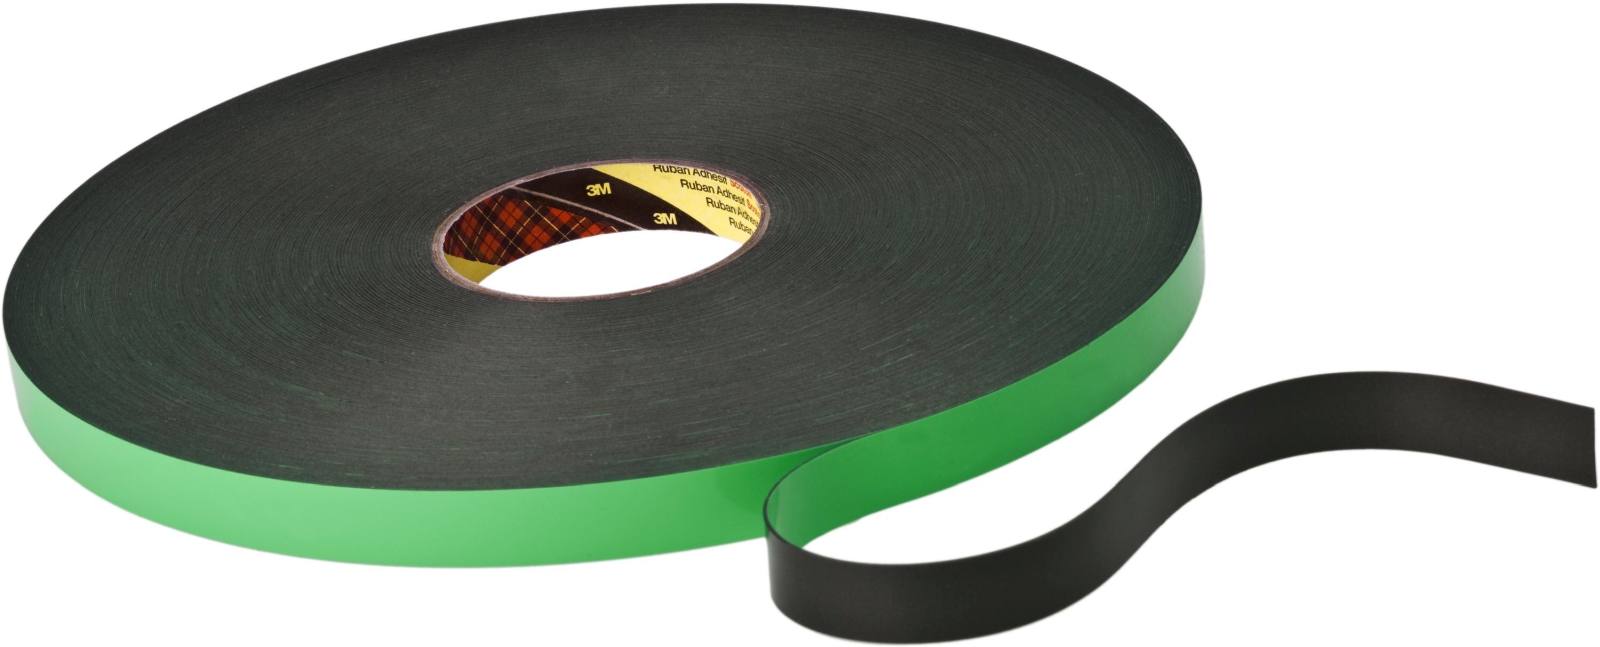 3M Double-sided PE foam tape with acrylic adhesive 9515B, black, 6 mm x 33 m, 1.5 mm